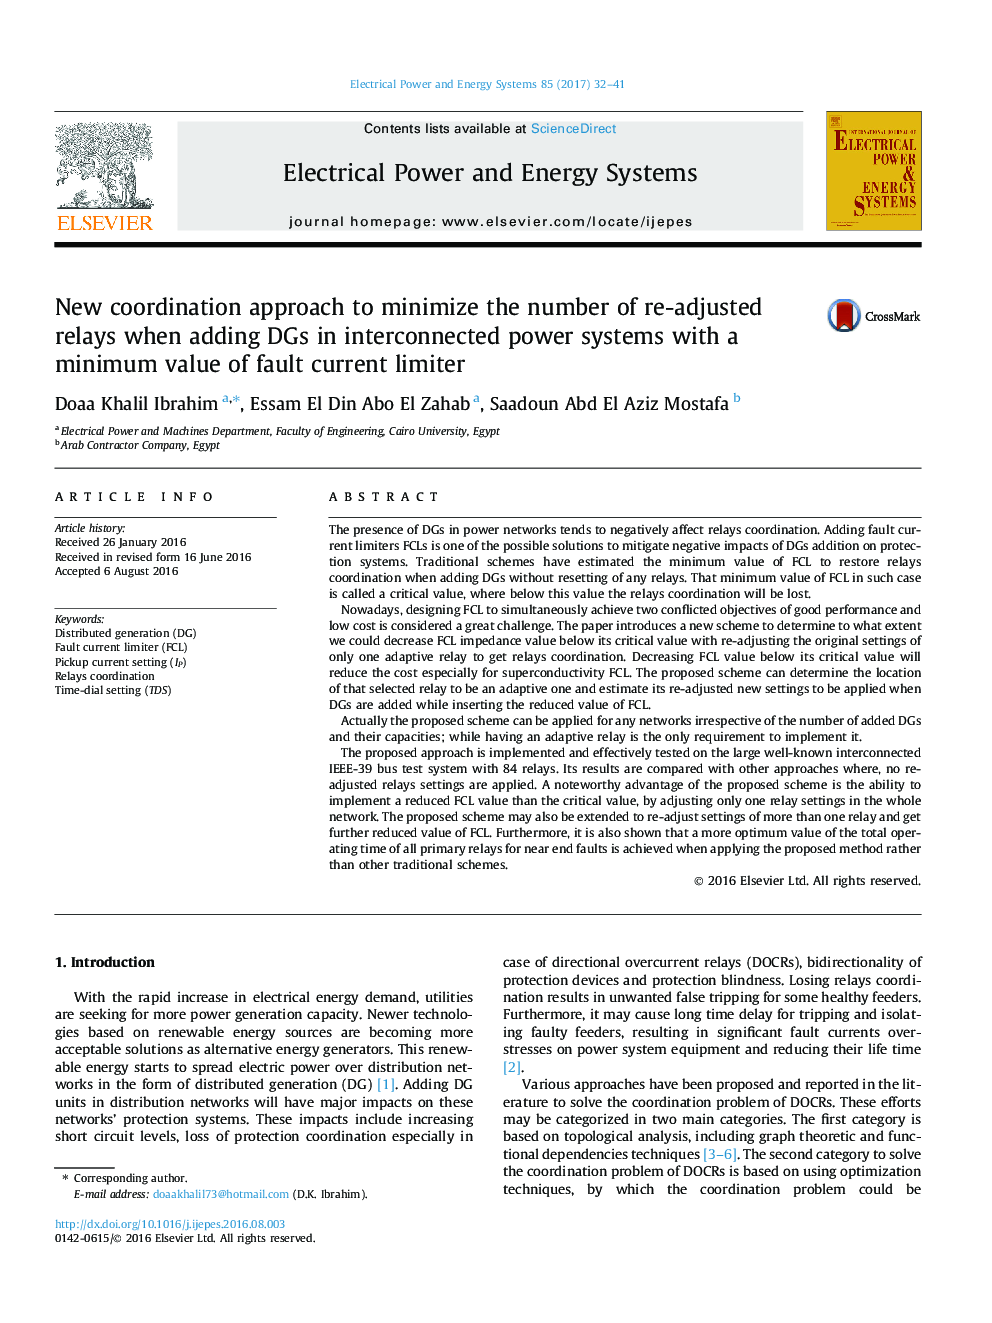 New coordination approach to minimize the number of re-adjusted relays when adding DGs in interconnected power systems with a minimum value of fault current limiter